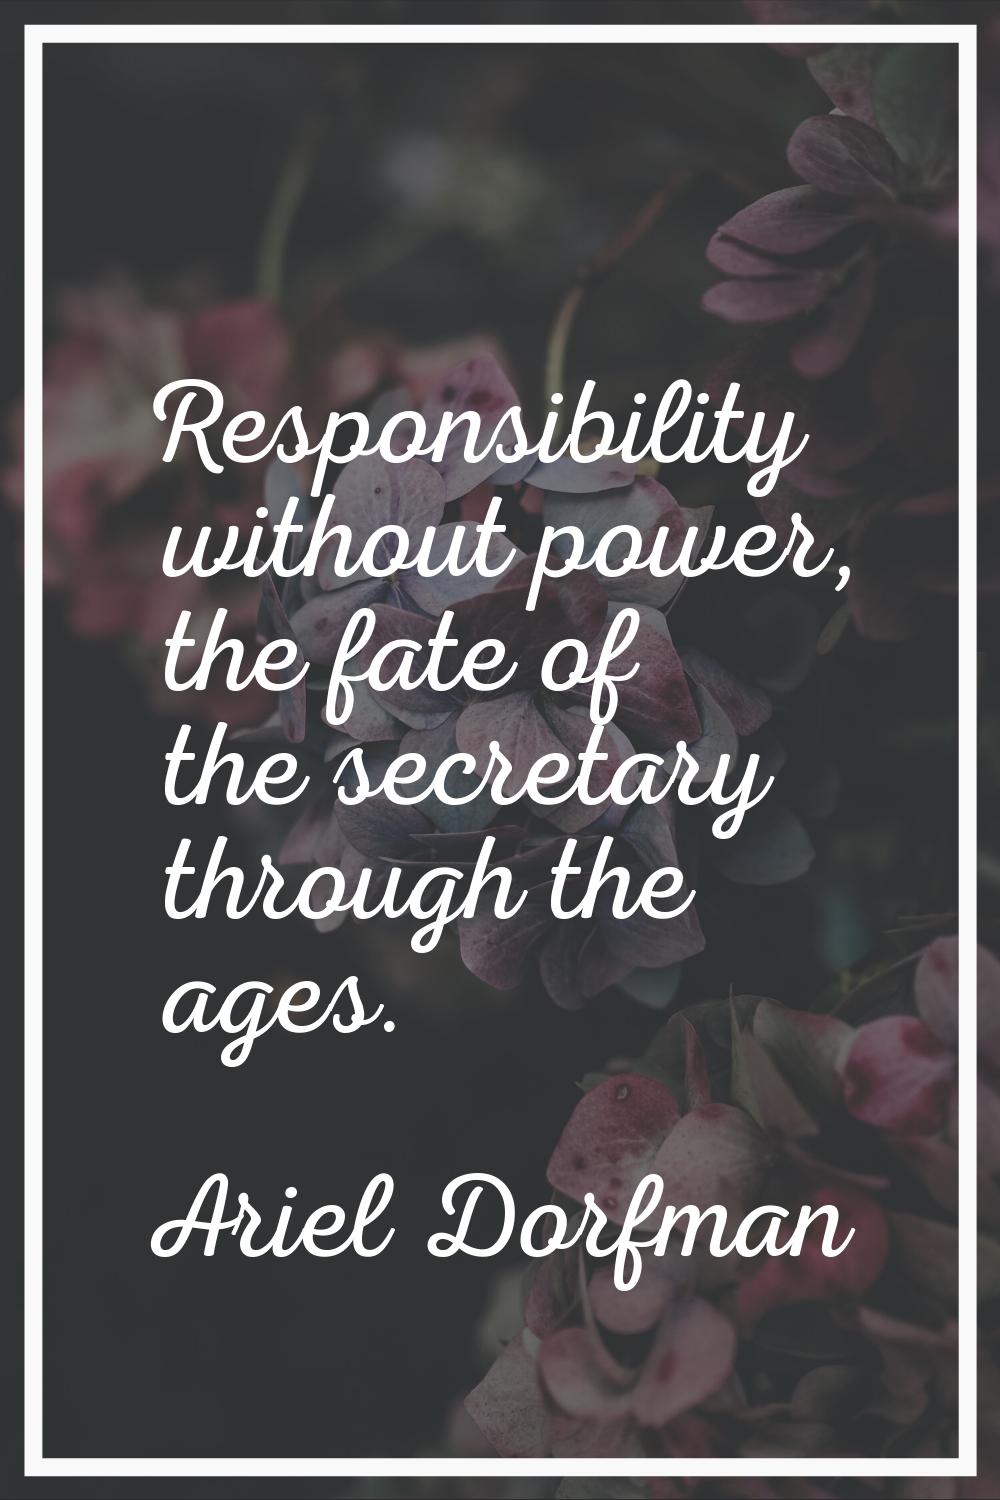 Responsibility without power, the fate of the secretary through the ages.